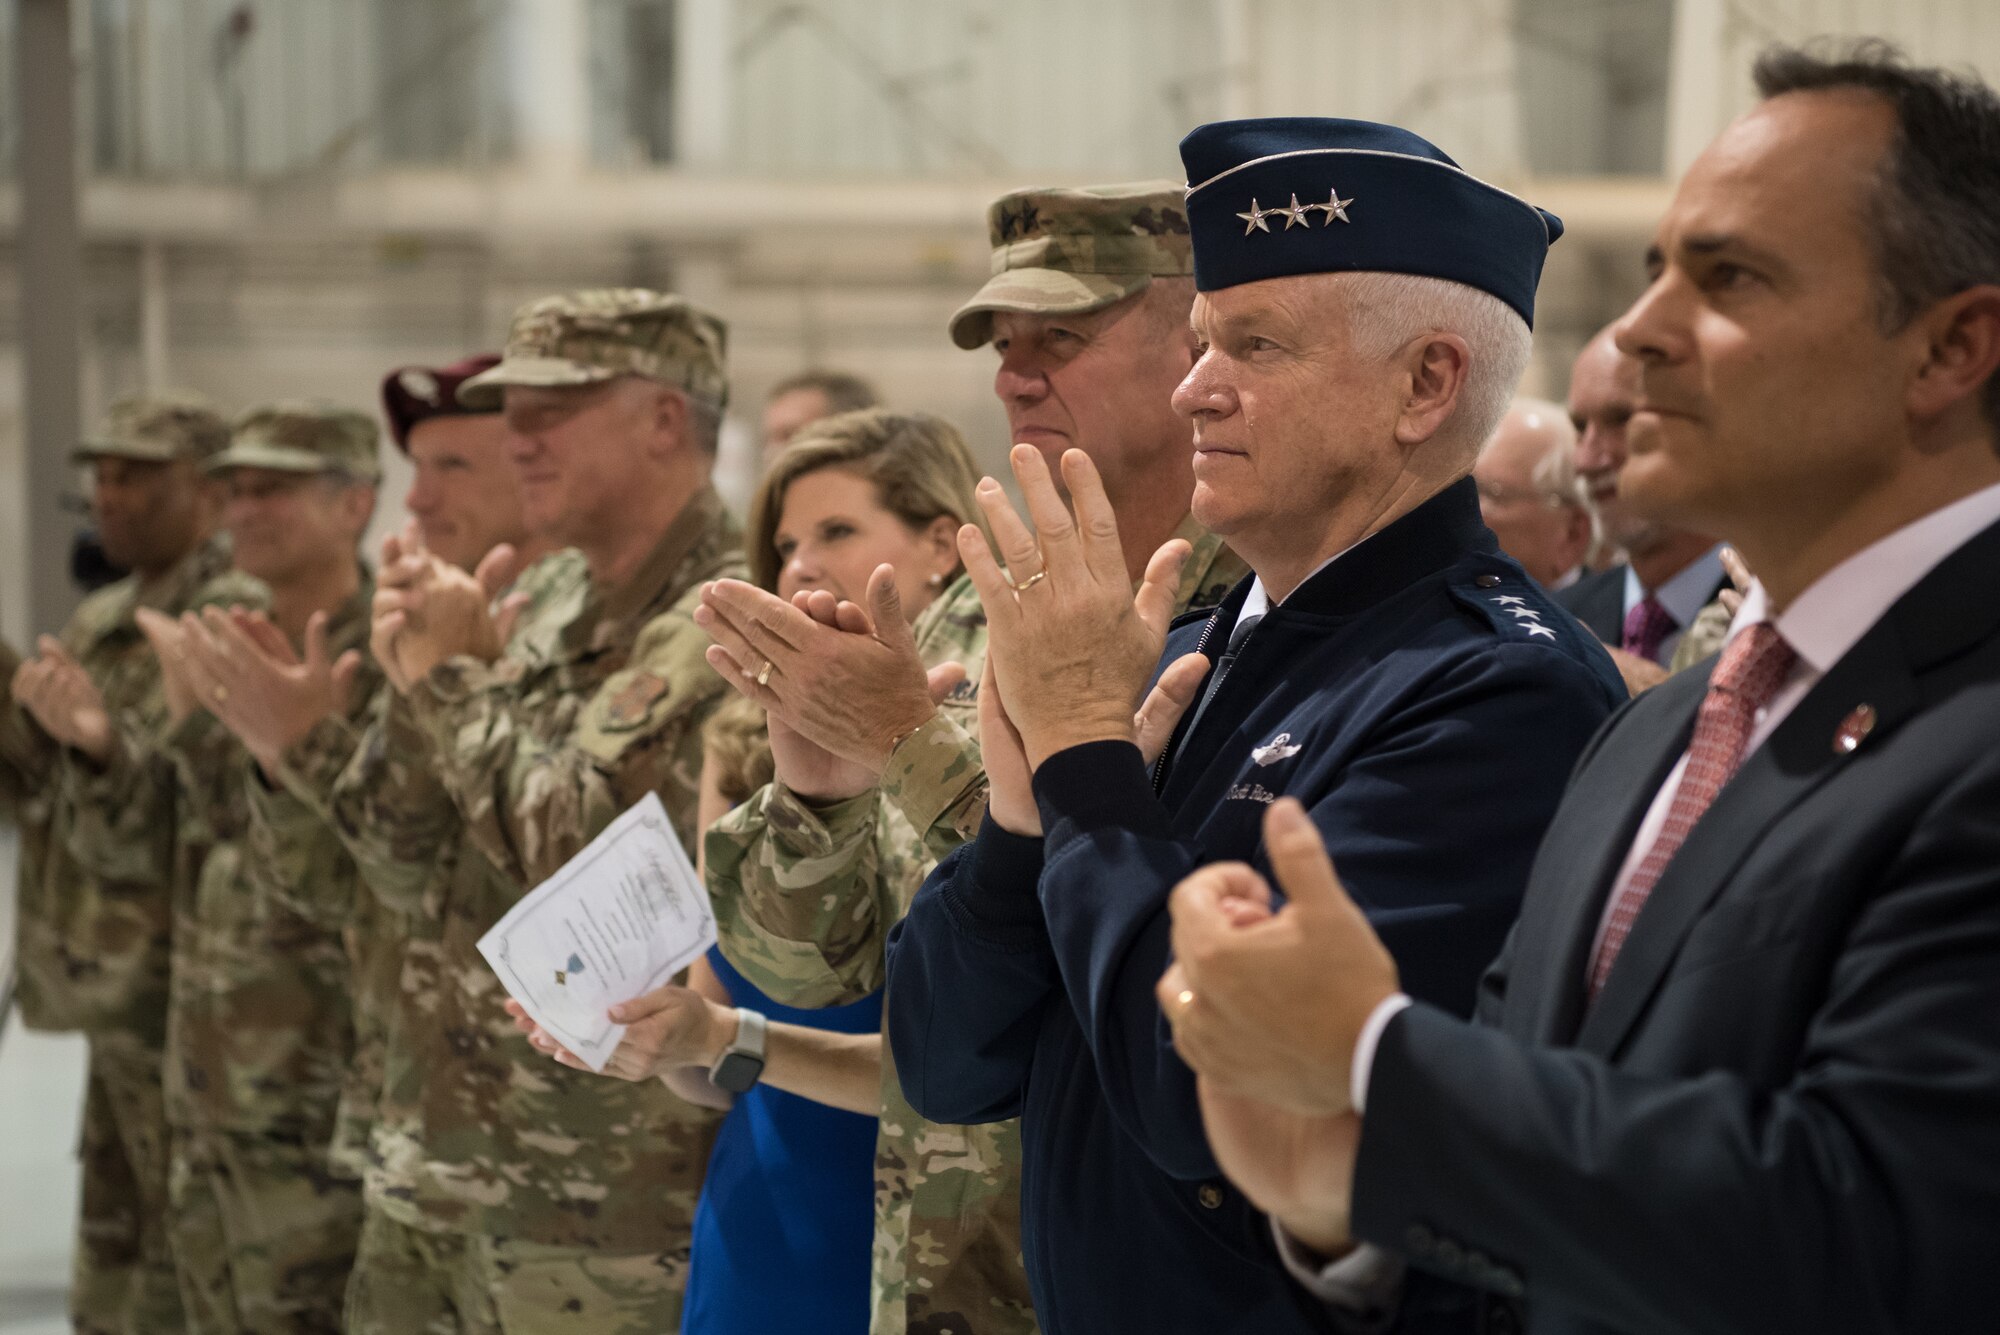 Kentucky Gov. Matt Bevin (far right), Lt. Gen. L. Scott Rice (second from right), director of the Air National Guard, and Army Maj. Gen. Stephen R. Hogan (third from right), adjutant general of the Kentucky National Guard, applaud Tech. Sgt. Daniel Keller, a combat controller in the 123rd Special Tactics Squadron, during a ceremony at the Kentucky Air National Guard Base in Louisville, Ky, Aug.13, 2019. At the ceremony, Air Force Chief of Staff Gen. David L. Goldfein presented Keller with the Air Force Cross, which Keller earned for valor on the battlefield in Afghanistan. (U.S. Air National Guard photo by Staff Sgt. Joshua Horton)